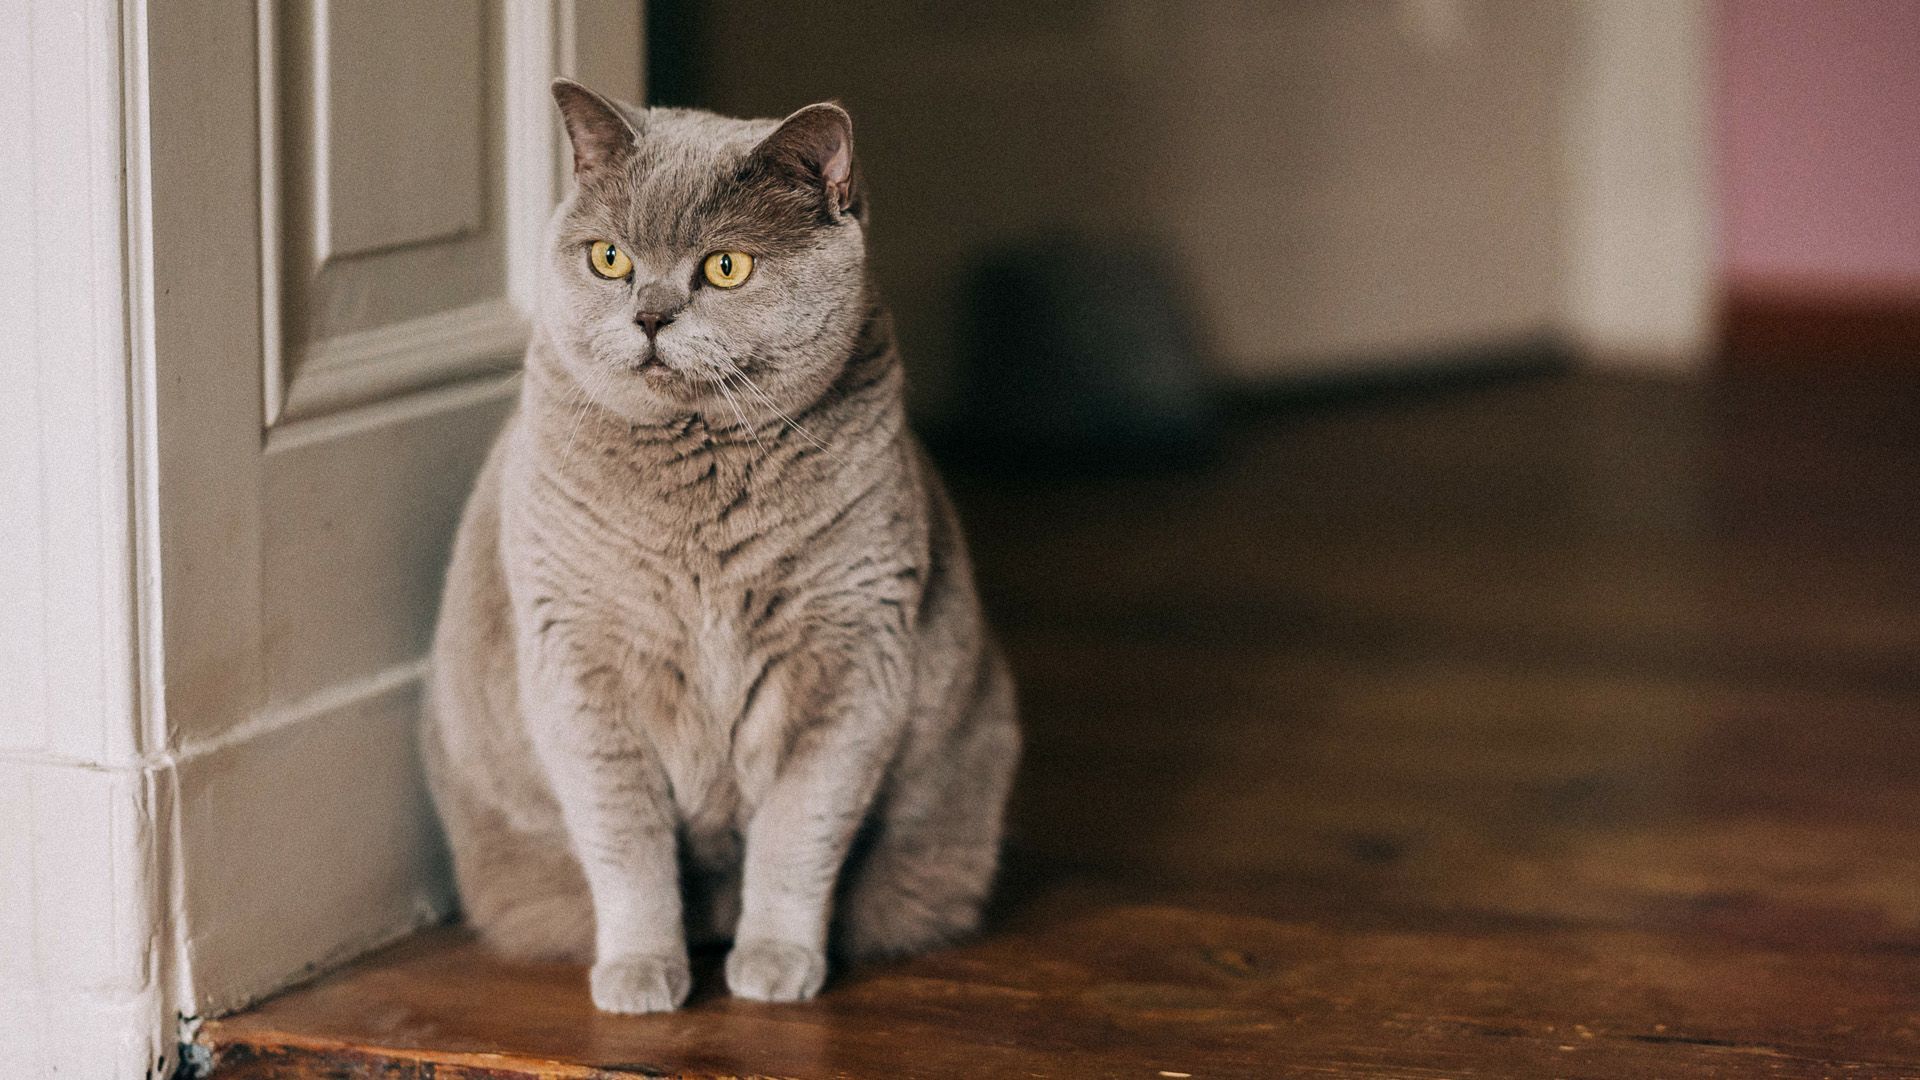 Cat too fat: How to recognize and fight obesity